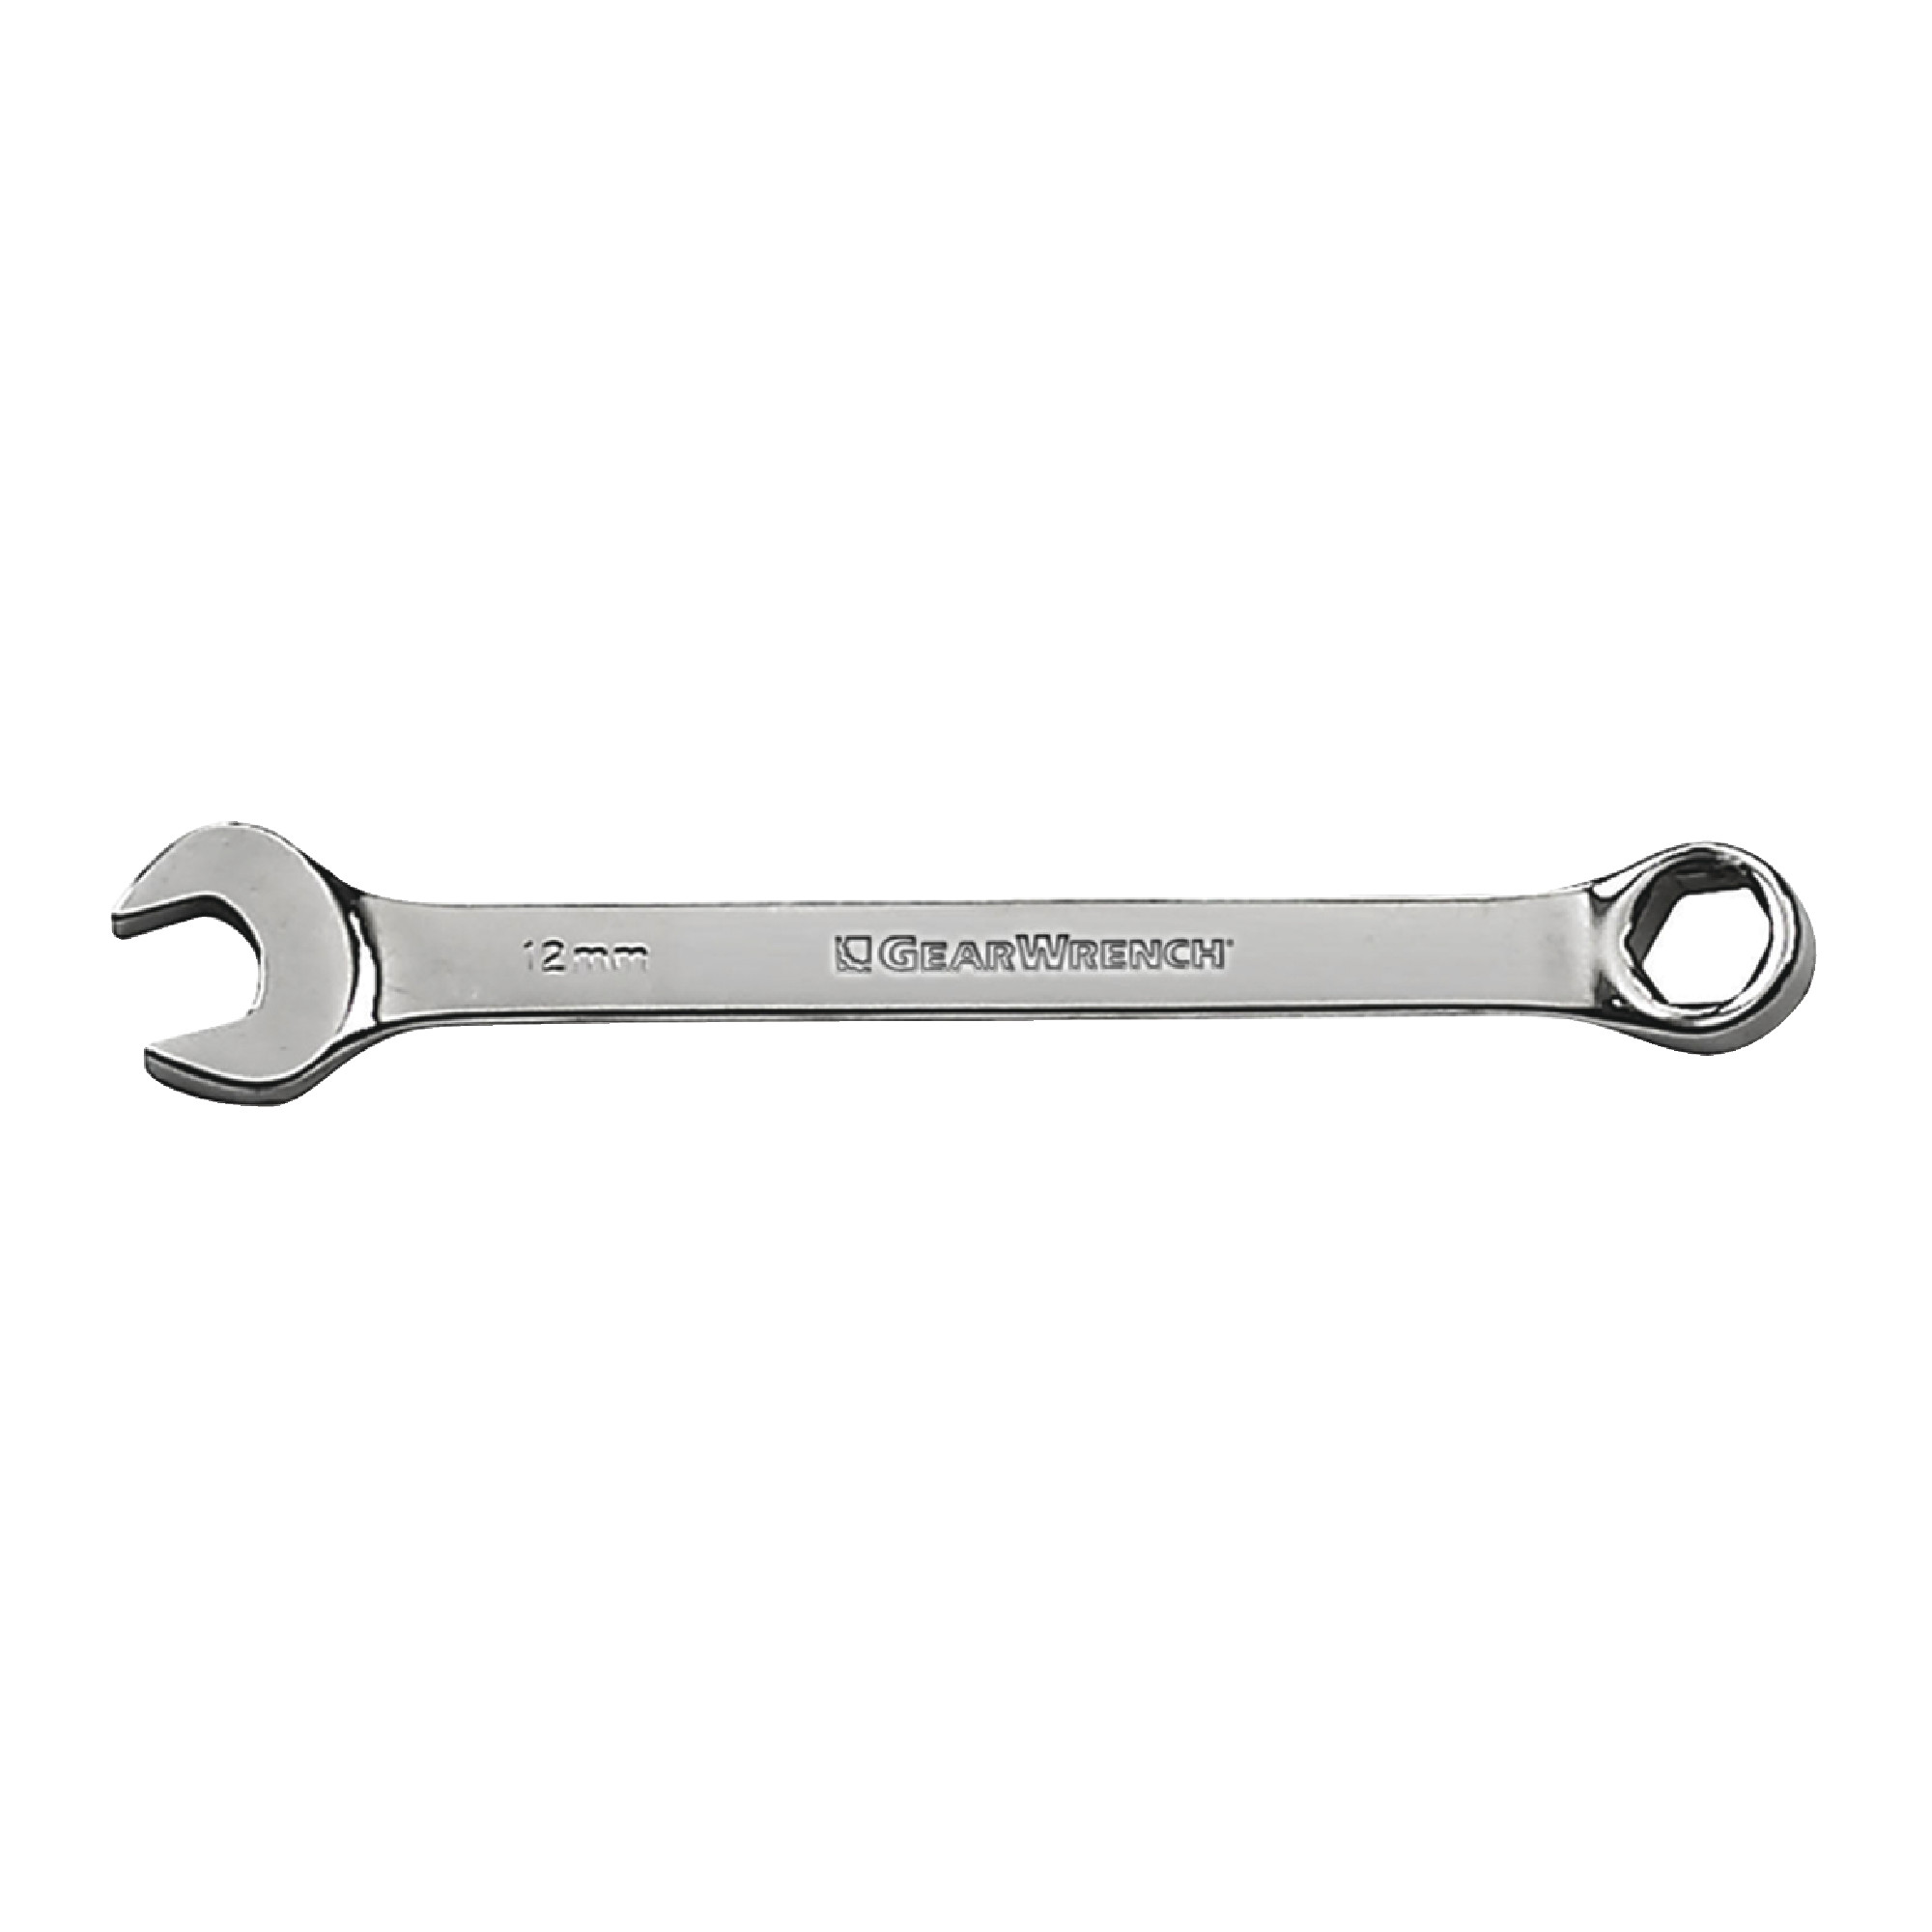 15mm 6 Point Combination Wrench